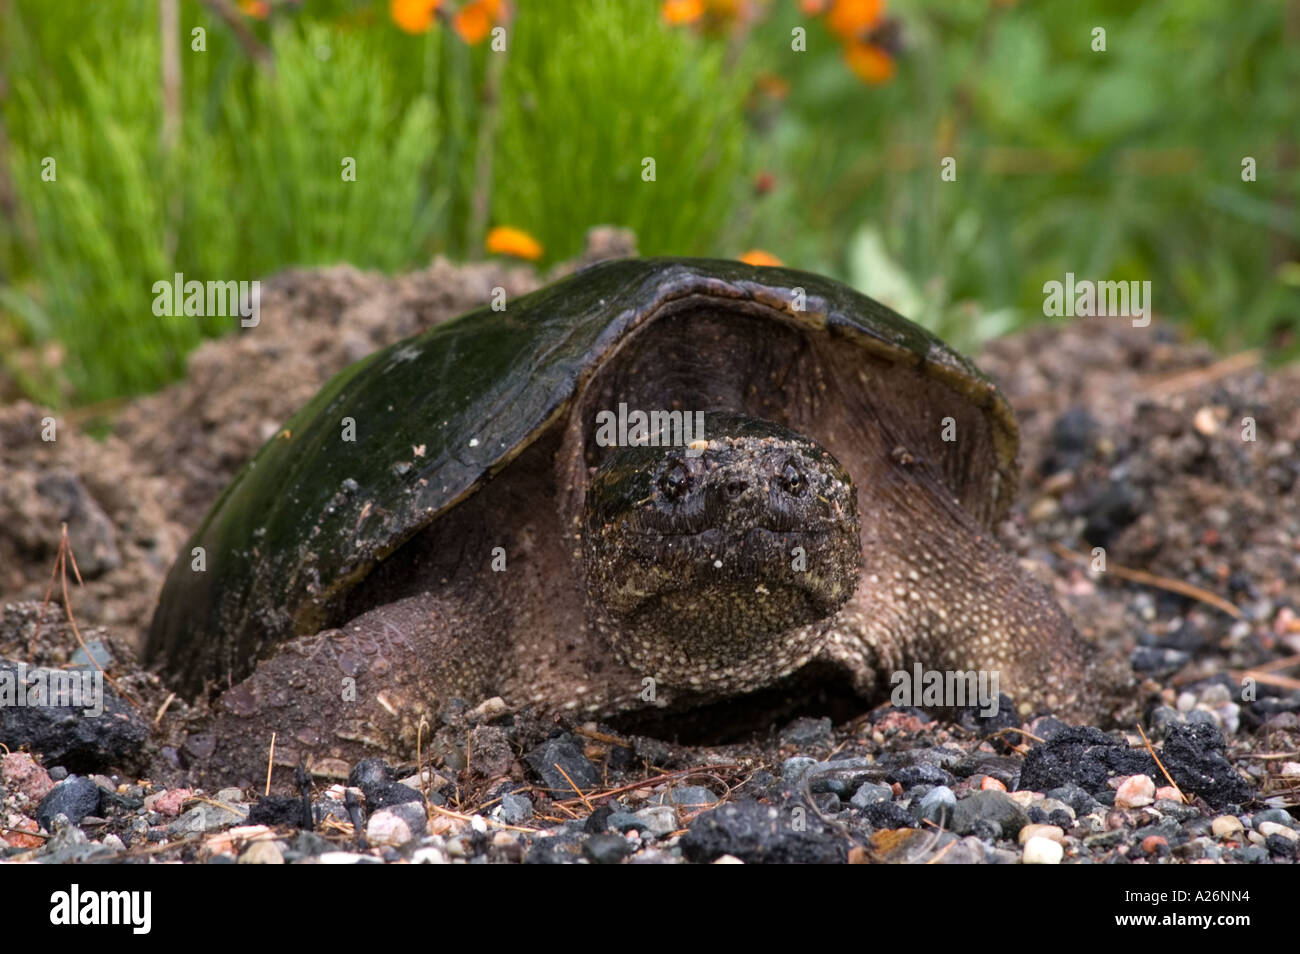 Snapping turtle (Chelydra serpentina) Female laying eggs in roadside gravel Ontario, Canada Stock Photo